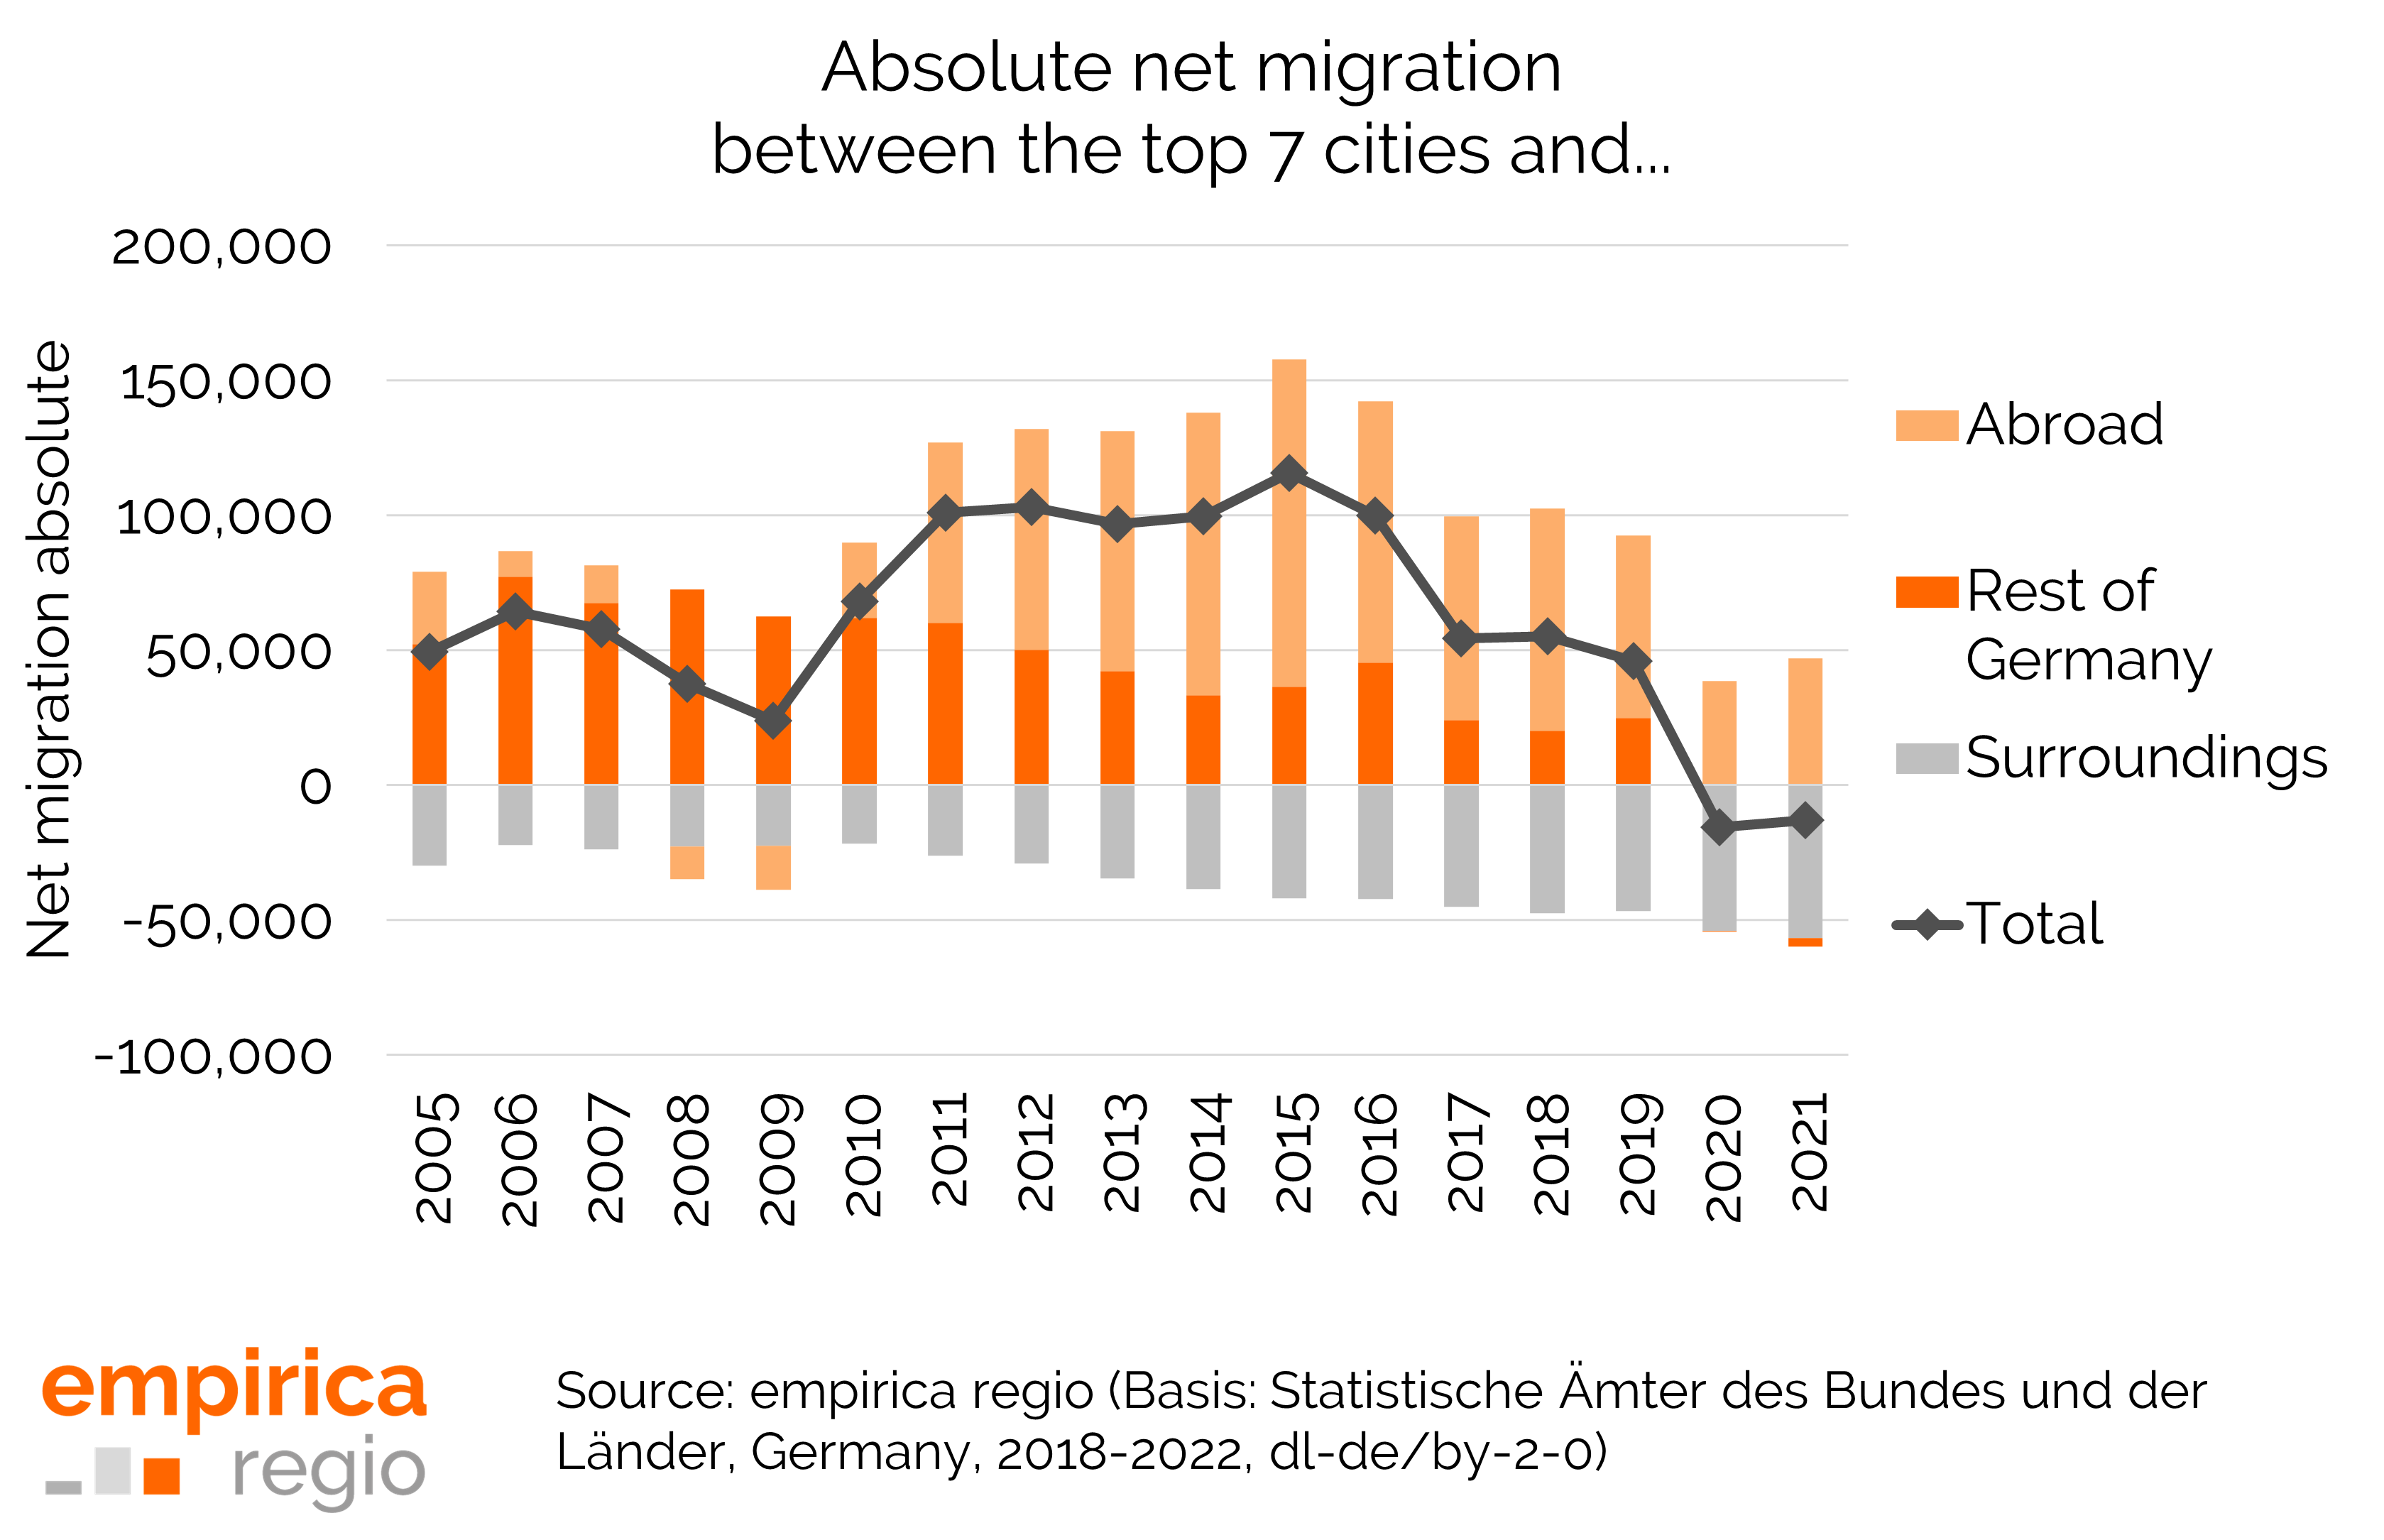 Absolute net migration of the top 7 cities (combined) in the years 2005 to 2021 within Germany